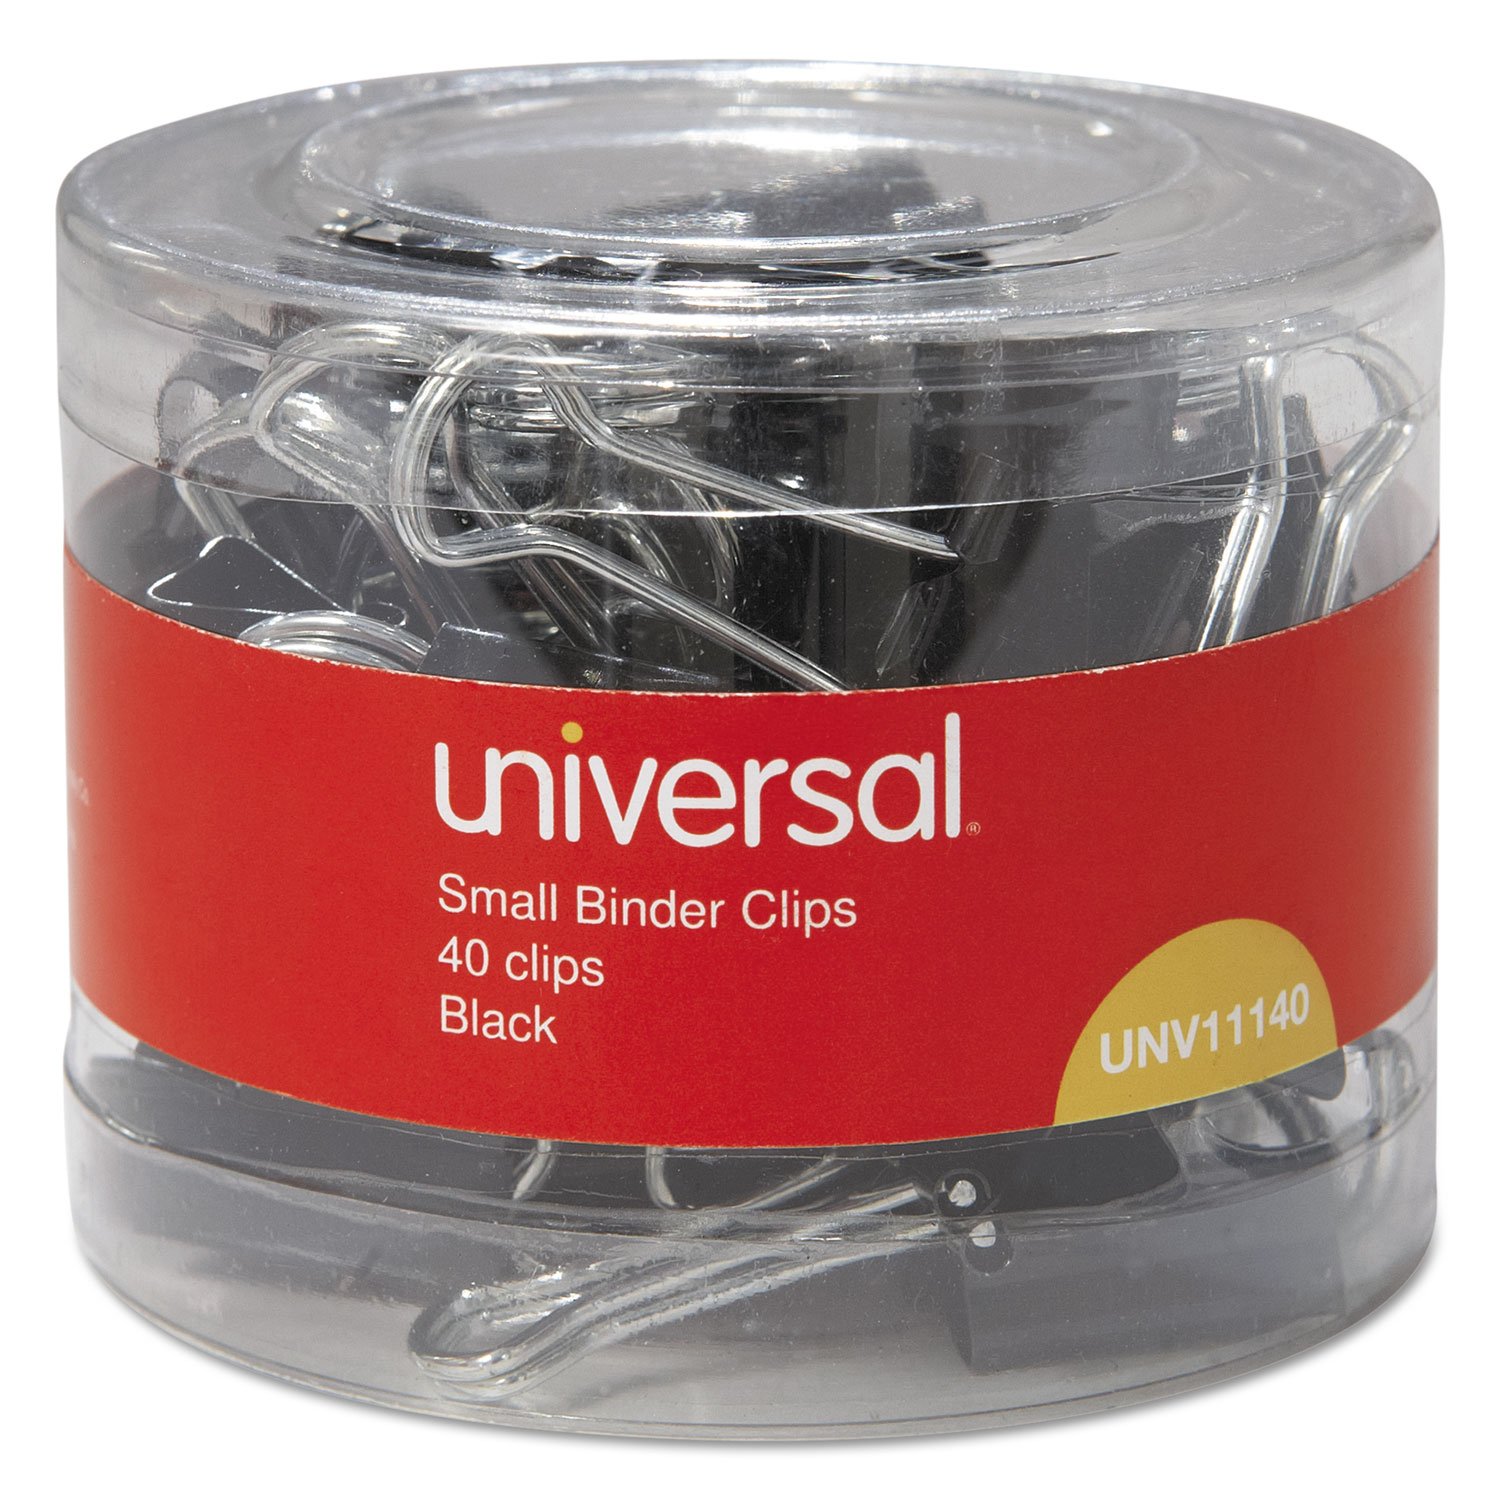 40-Pack Universal 11140 Small Binder Clips (Black) $1.58 + Free Shipping w/ Prime or on $25+